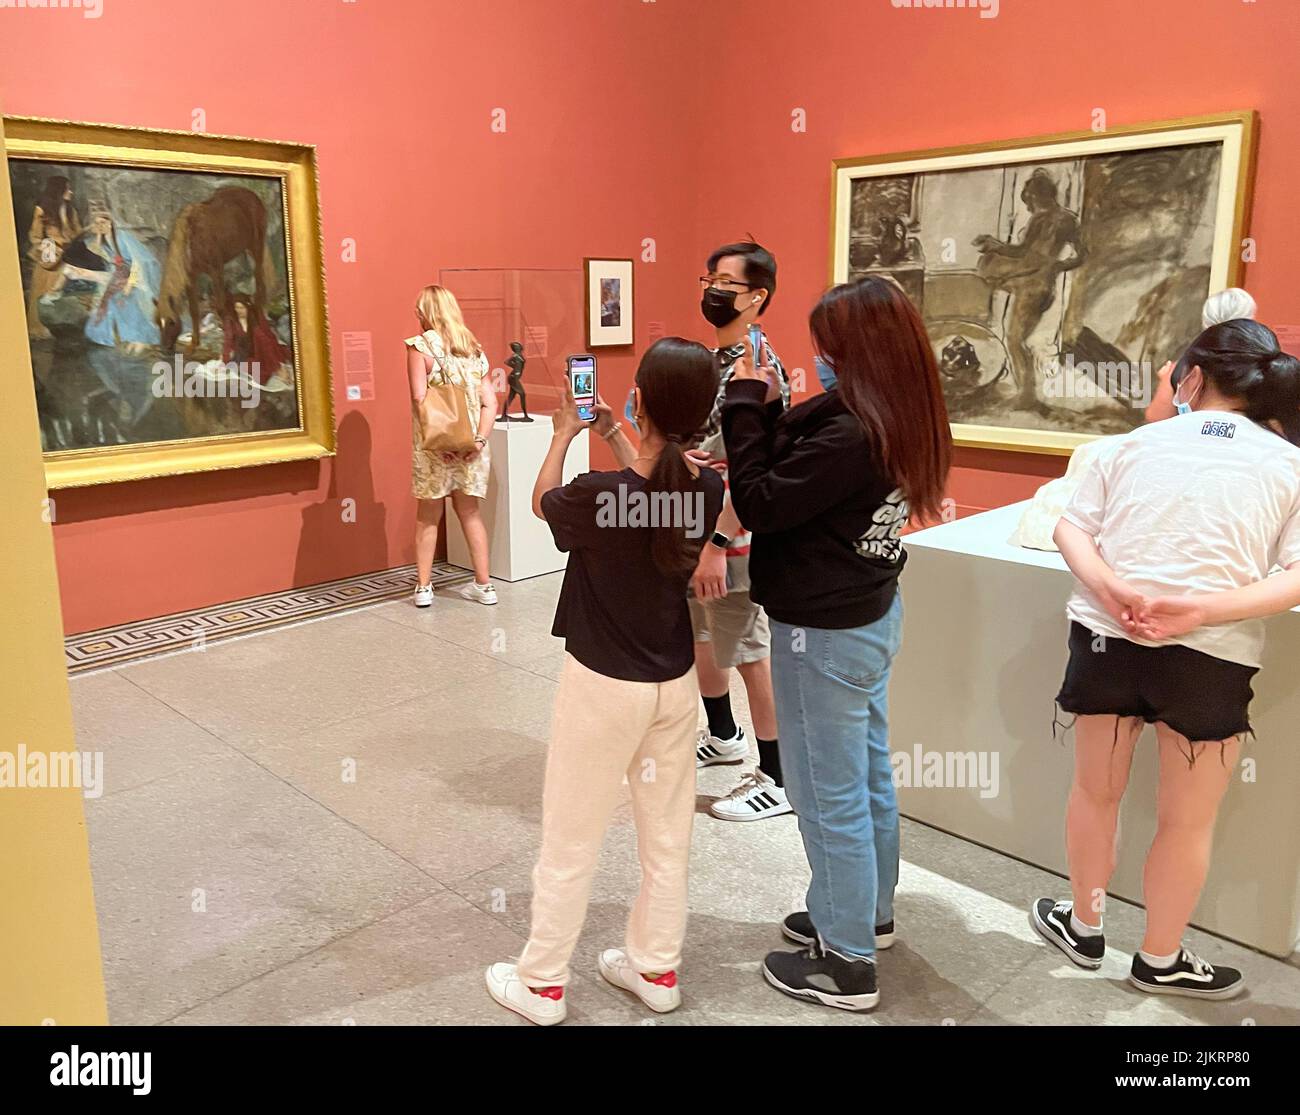 Cell phones have become an integral part of the museum experience, by documenting and remembering the art they see. Brooklyn Museum, Brooklyn, NY. Stock Photo